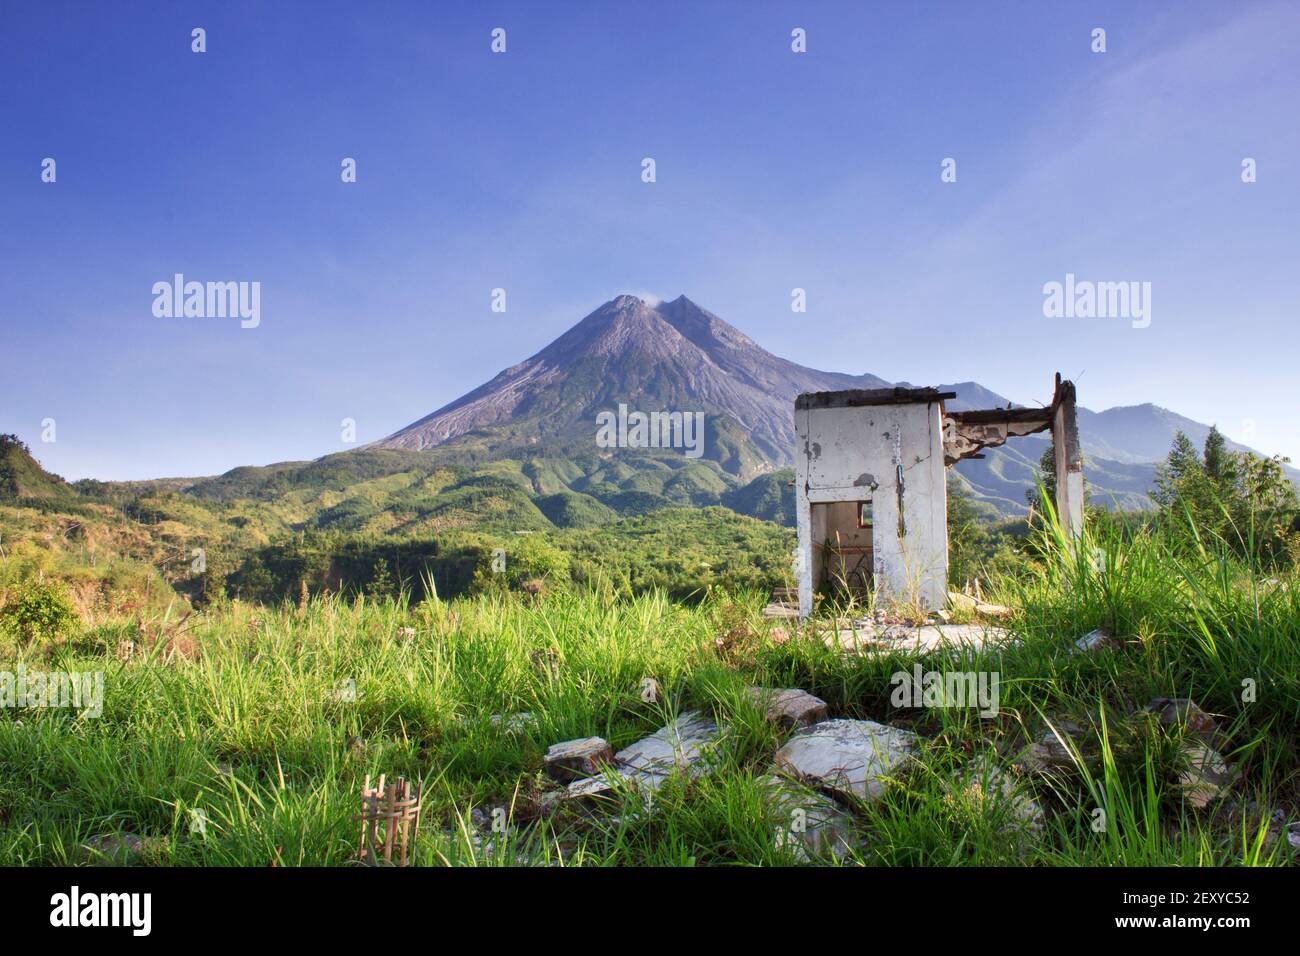 A Wrecked House from Merapi Mountain Eruption, Central Java, Indonesia Stock Photo